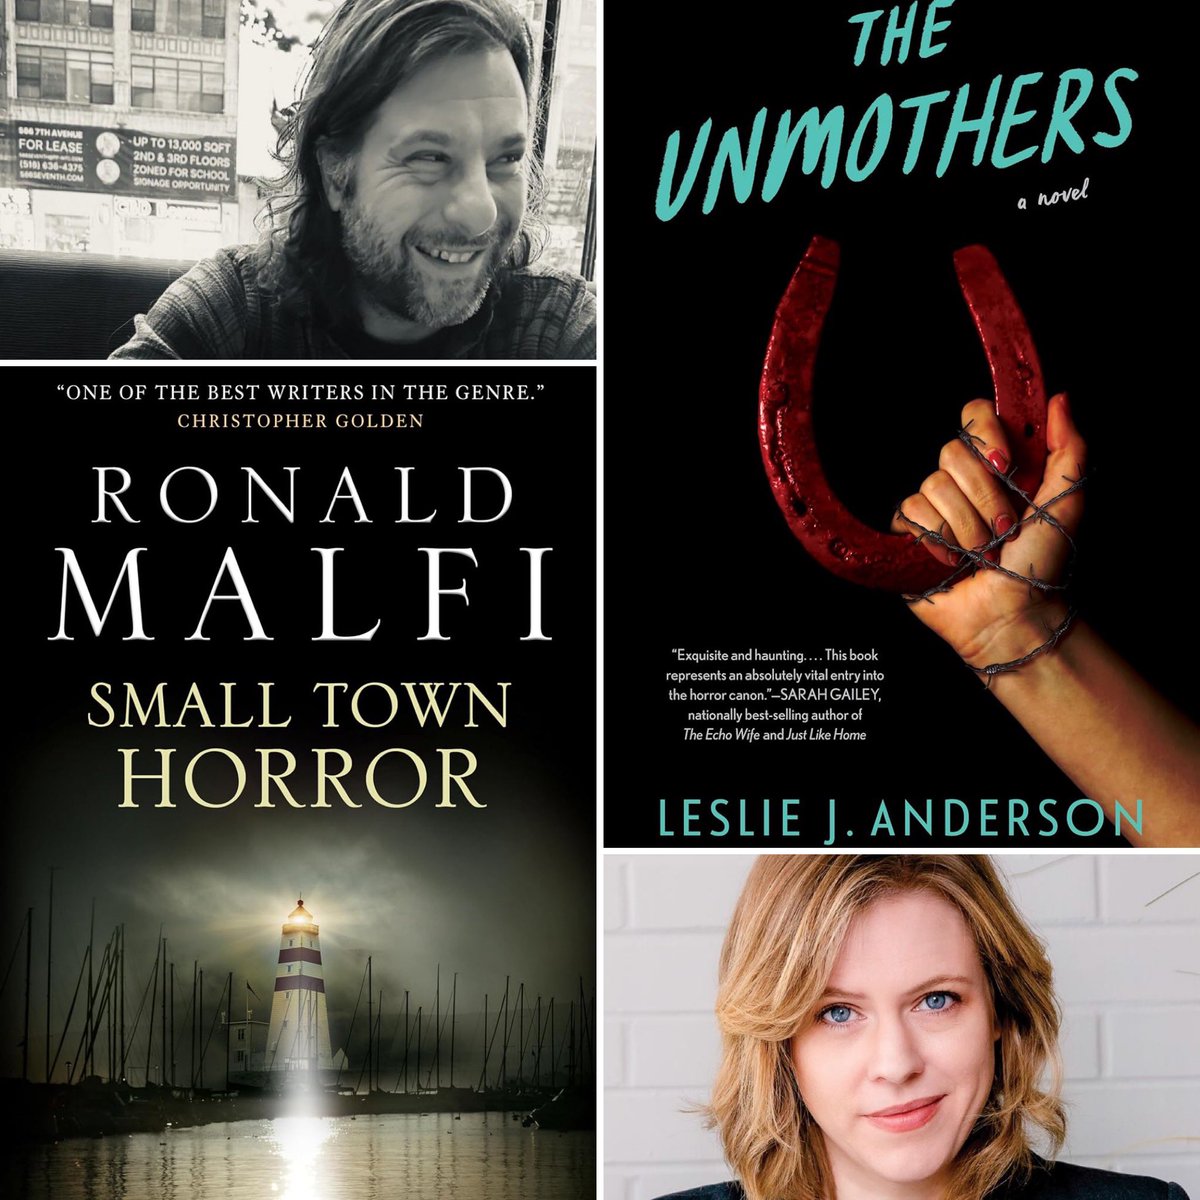 Next week, Ronald Malfi (SMALL TOWN HORROR) & Leslie J. Anderson (THE UNMOTHERS) join me for Fearmongers. Wednesday, May 22 at 8 PM/EST. Register via Zoom here: bit.ly/4aTpes4 #ronaldmalfi #leslieanderson #smalltownhorror #comewithme #theunmothers #titanbooks #quirkbooks